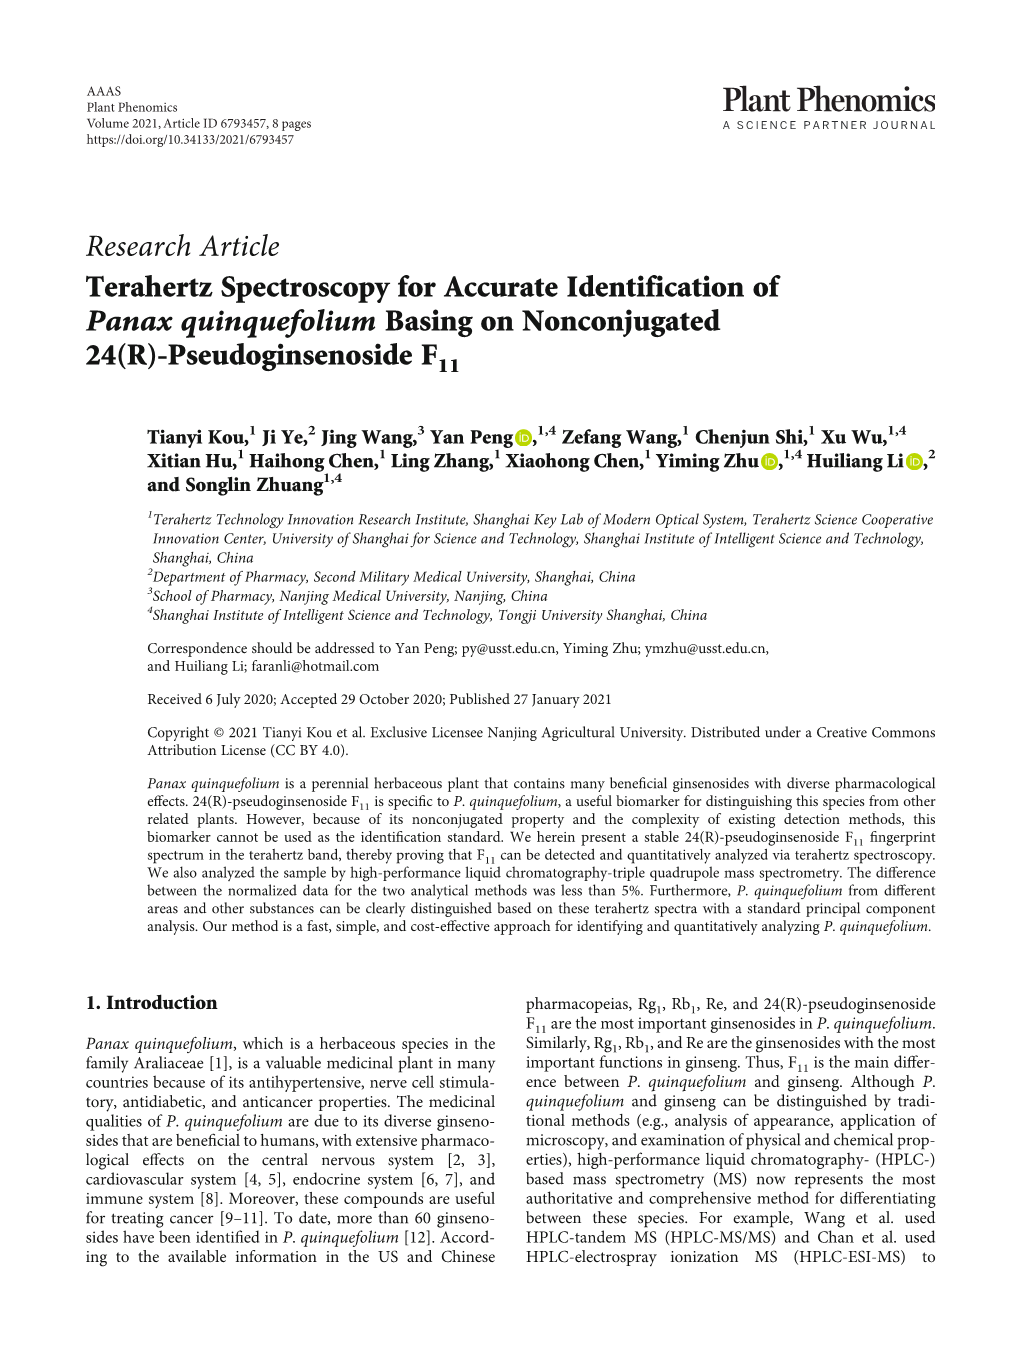 Research Article Terahertz Spectroscopy for Accurate Identification of Panax Quinquefolium Basing on Nonconjugated 24(R)-Pseudoginsenoside F11